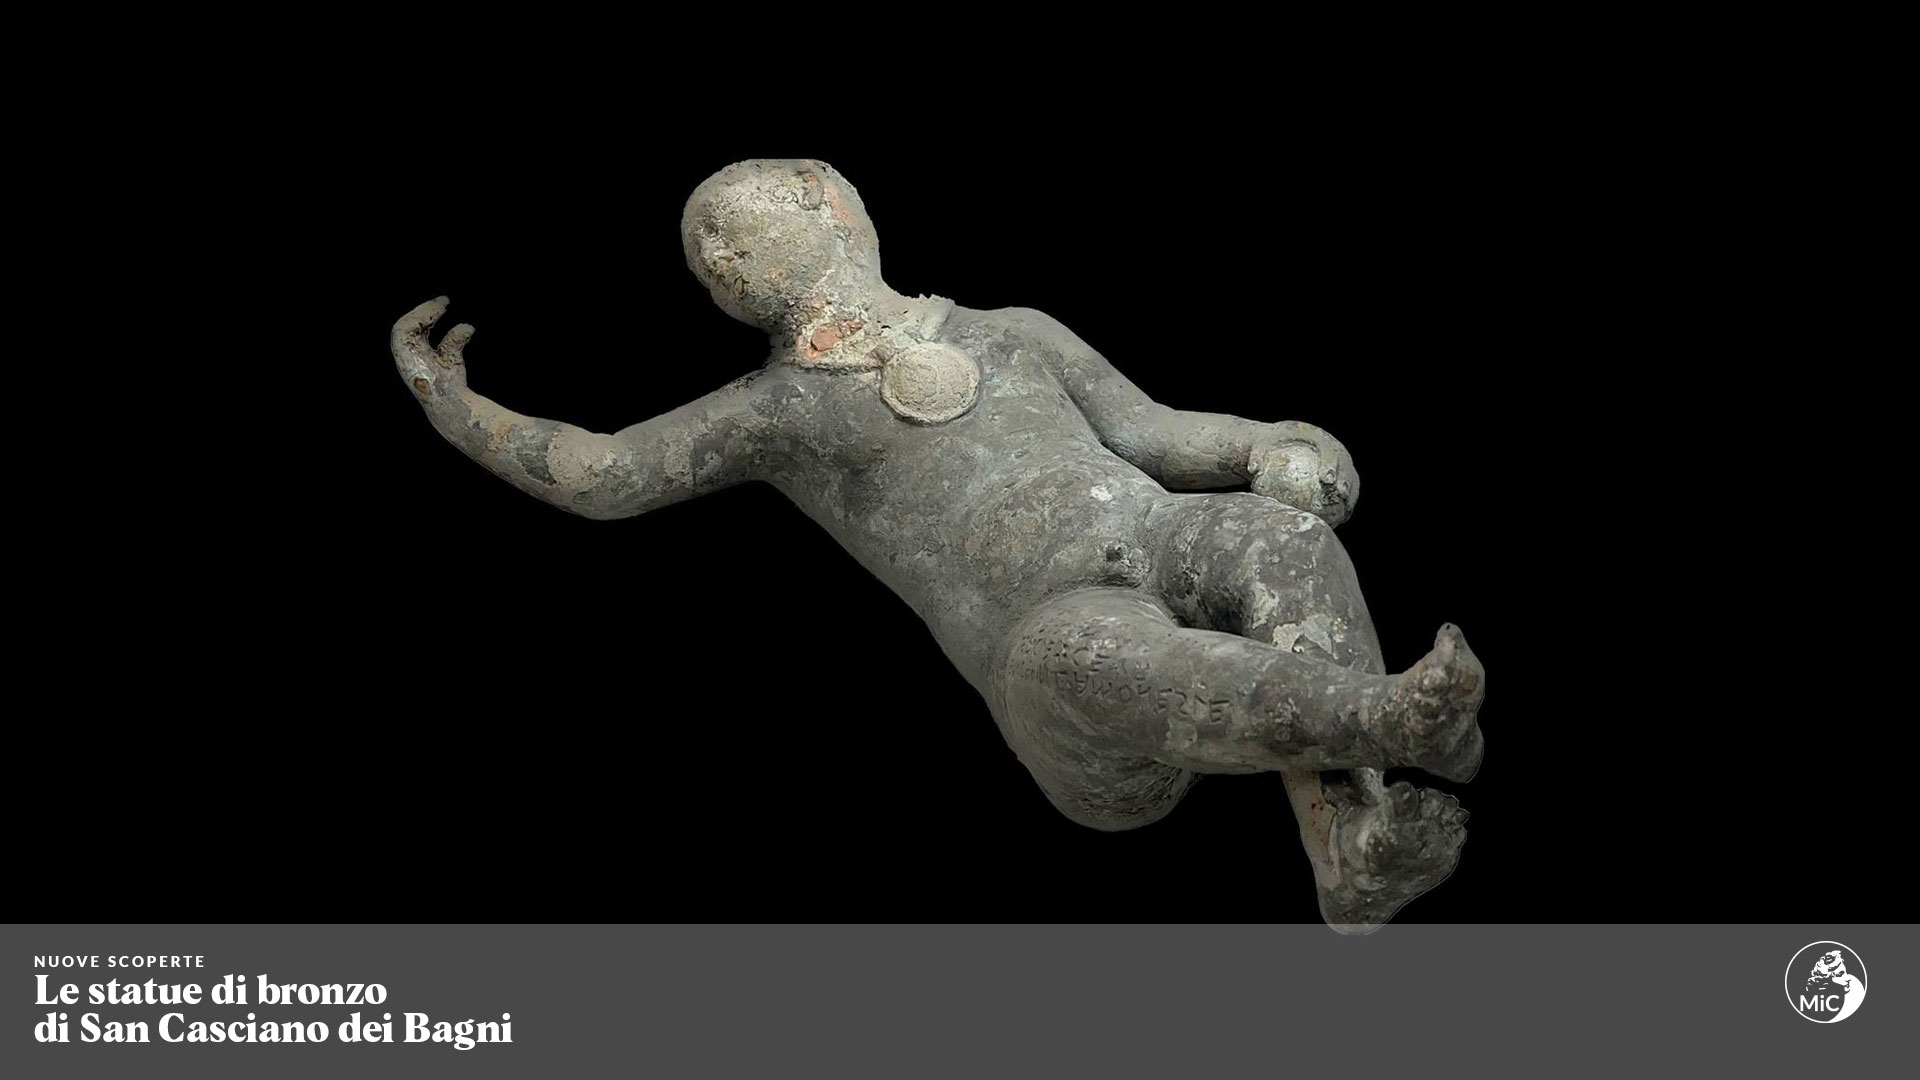 A small statue of a child, likely used as a votive offering to cure some ailment suffered by the real child.